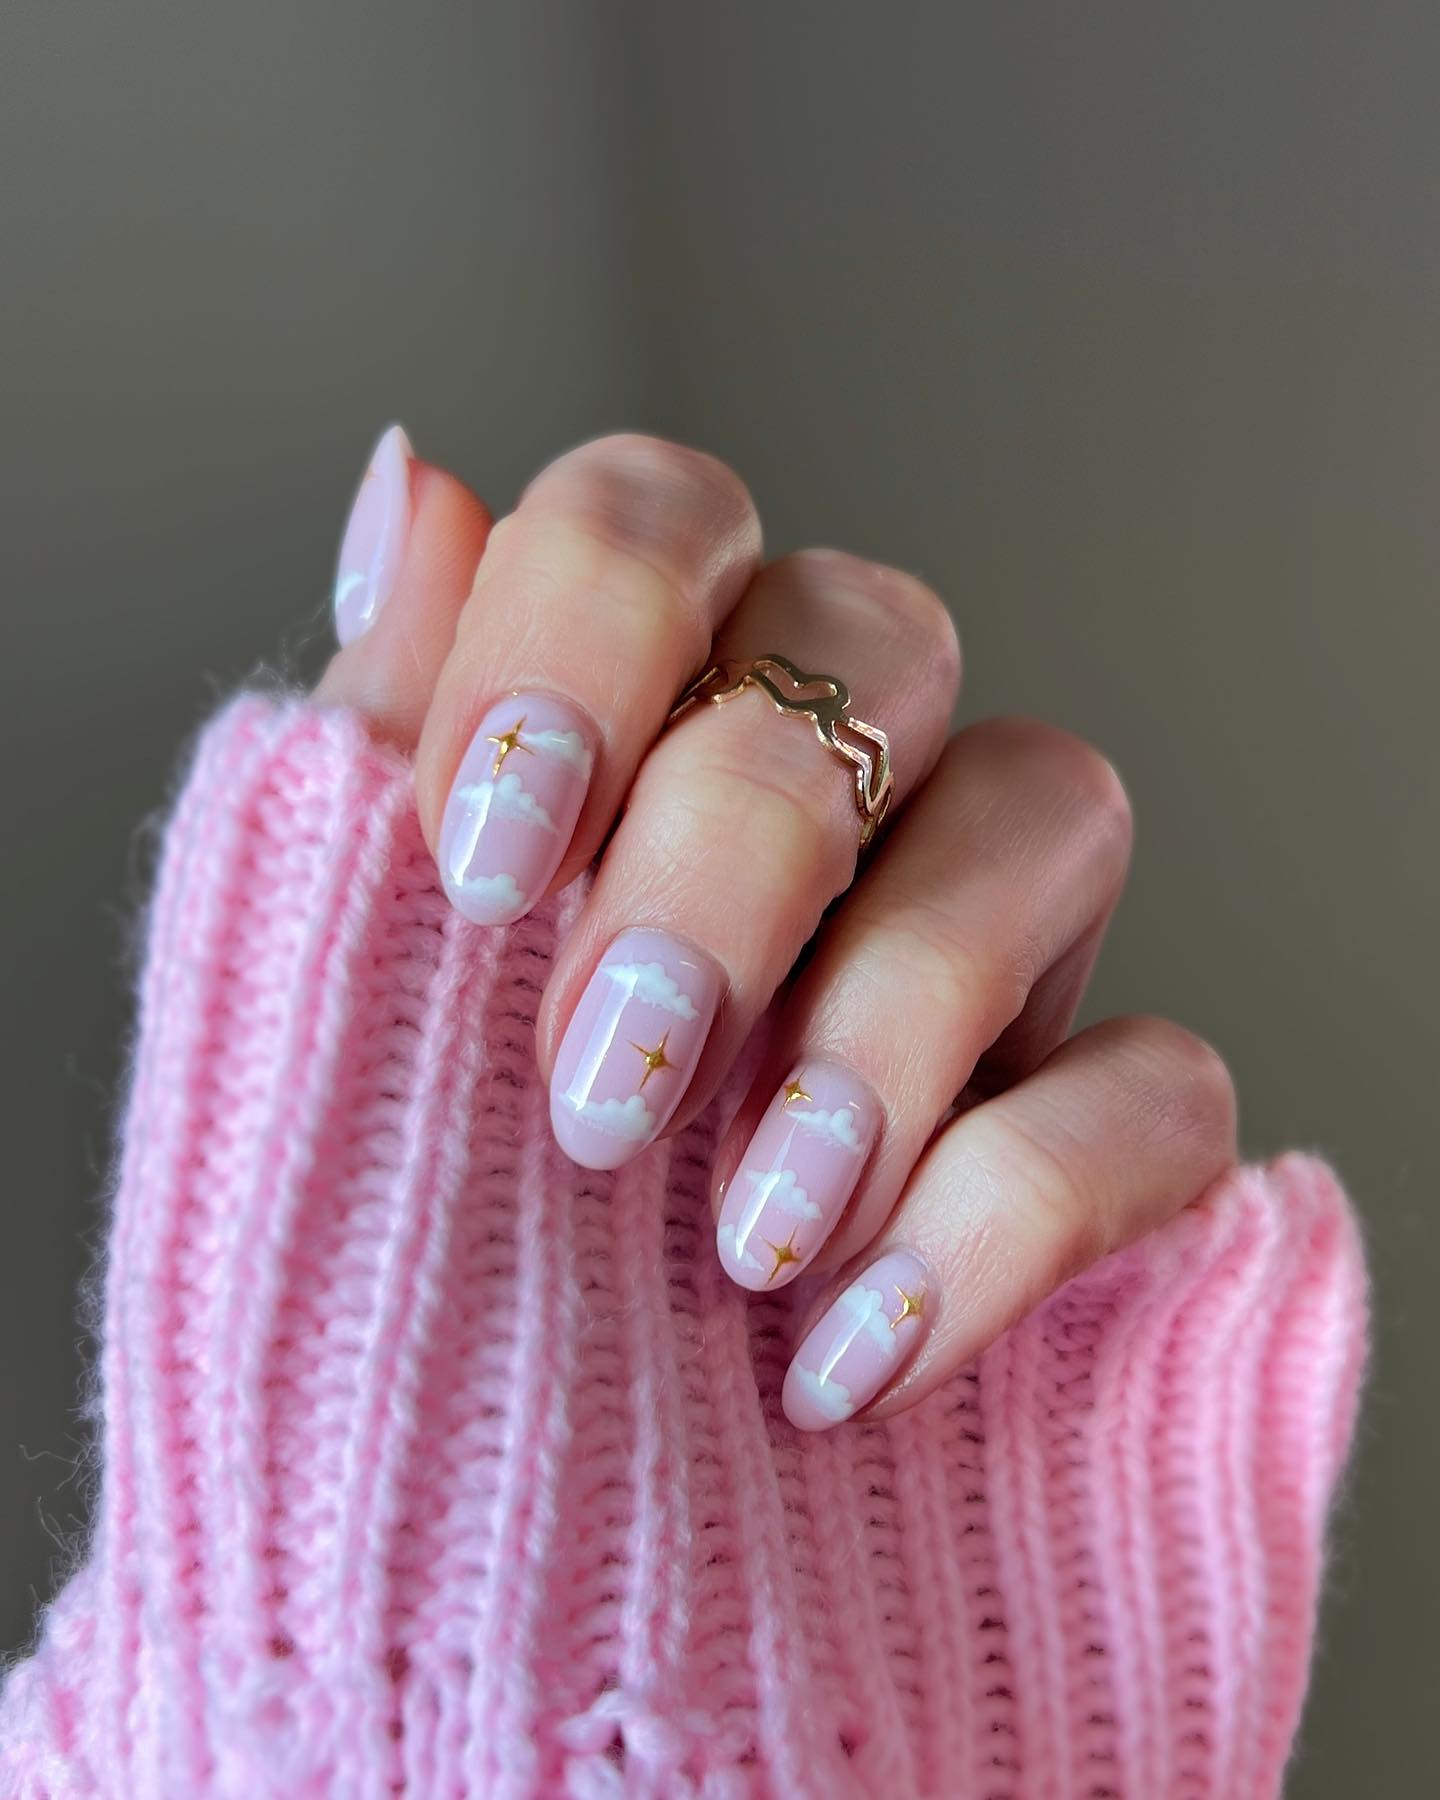 100+ Short Nail Designs You’ll Want To Try This Year images 54